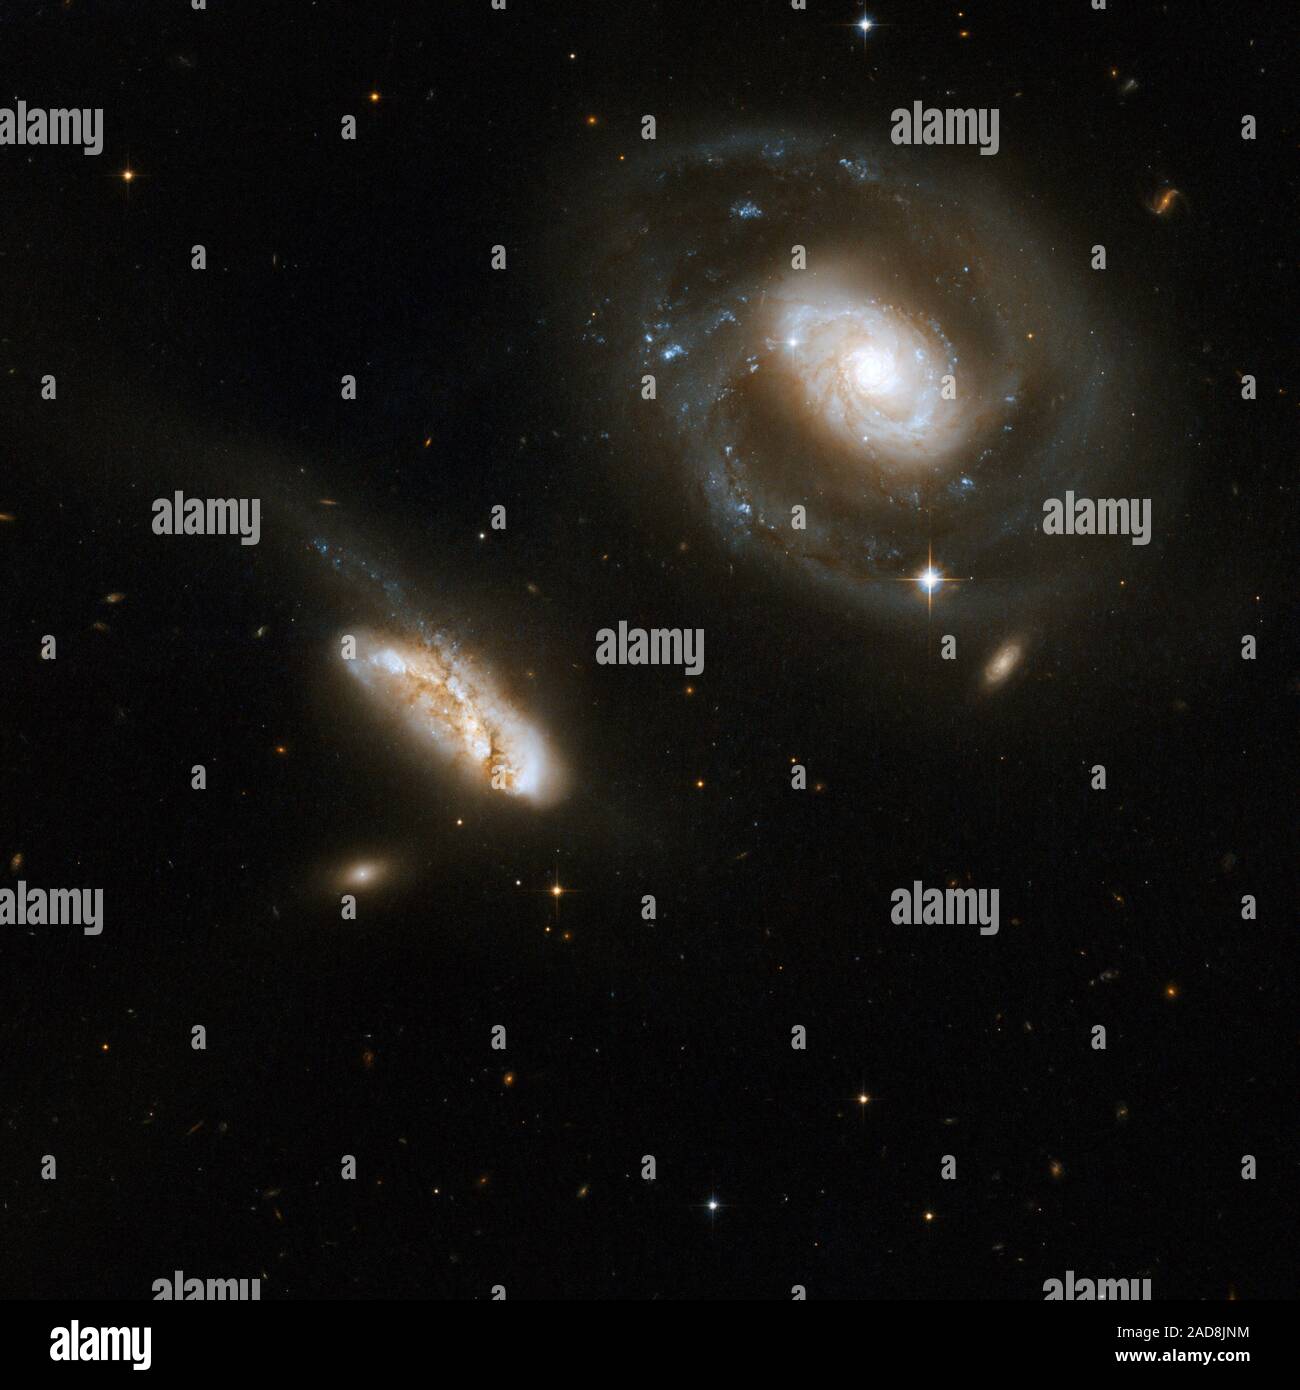 This is a stunning pair of interacting galaxies, the barred spiral Seyfert 1 galaxy NGC 7469 (Arp 298, Mrk 1514), a luminous infrared source with a powerful starburst deeply embedded into its circumnuclear region, and its smaller companion IC 5283. This system is located about 200 million light-years away from Earth in the constellation of Pegasus, the Winged Horse.   This image is part of a large collection of 59 images of merging galaxies taken by the Hubble Space Telescope and released on the occasion of its 18th anniversary on 24th April 2008.    Object Names: NGC 7469, QSO J2303+0852, Arp Stock Photo